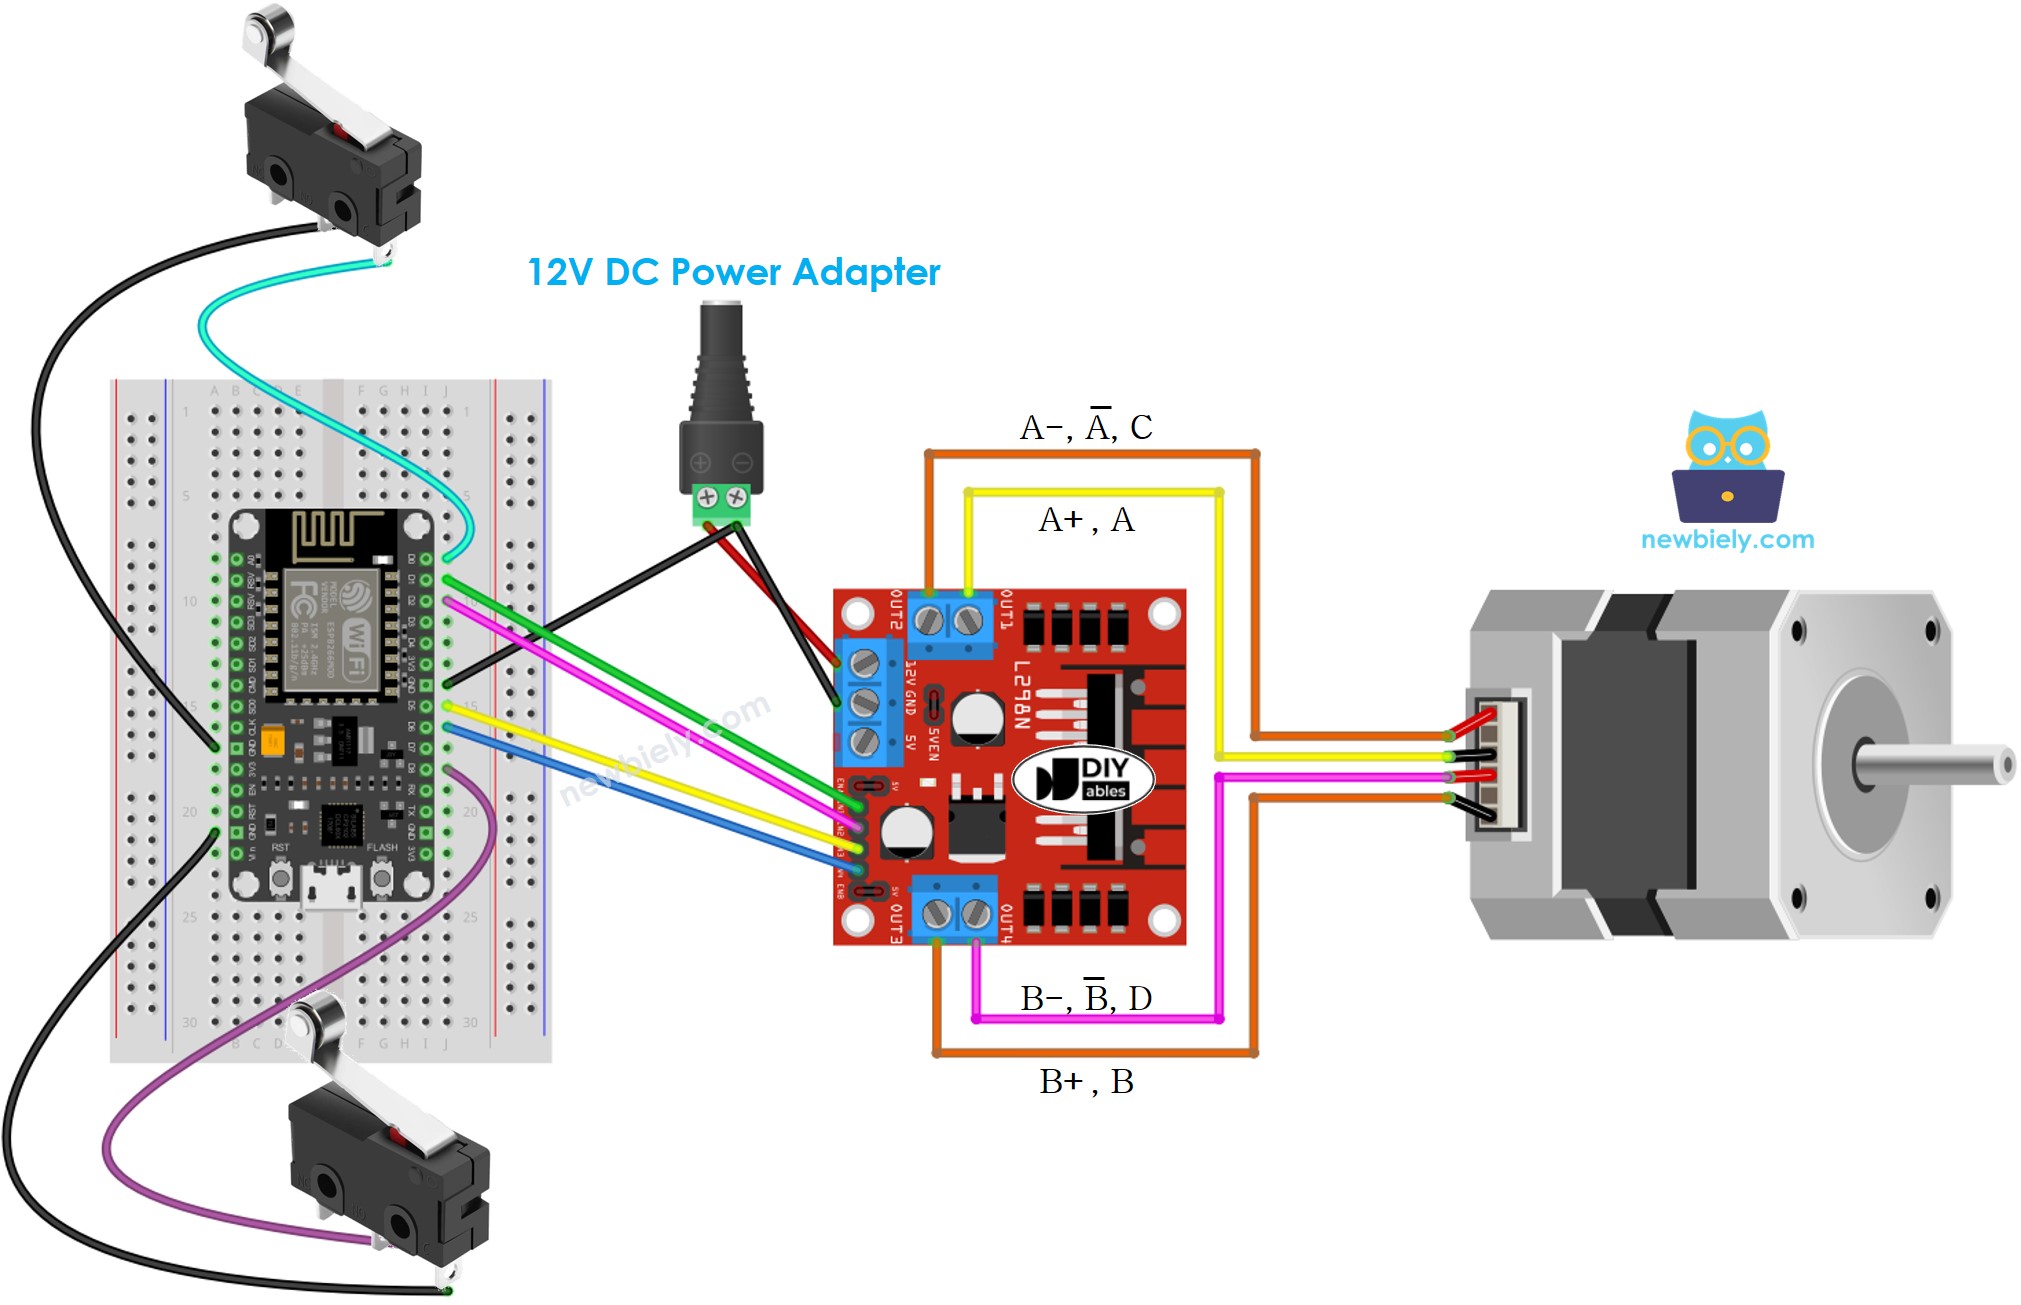 The wiring diagram between ESP8266 NodeMCU and stepper motor and two limit switches